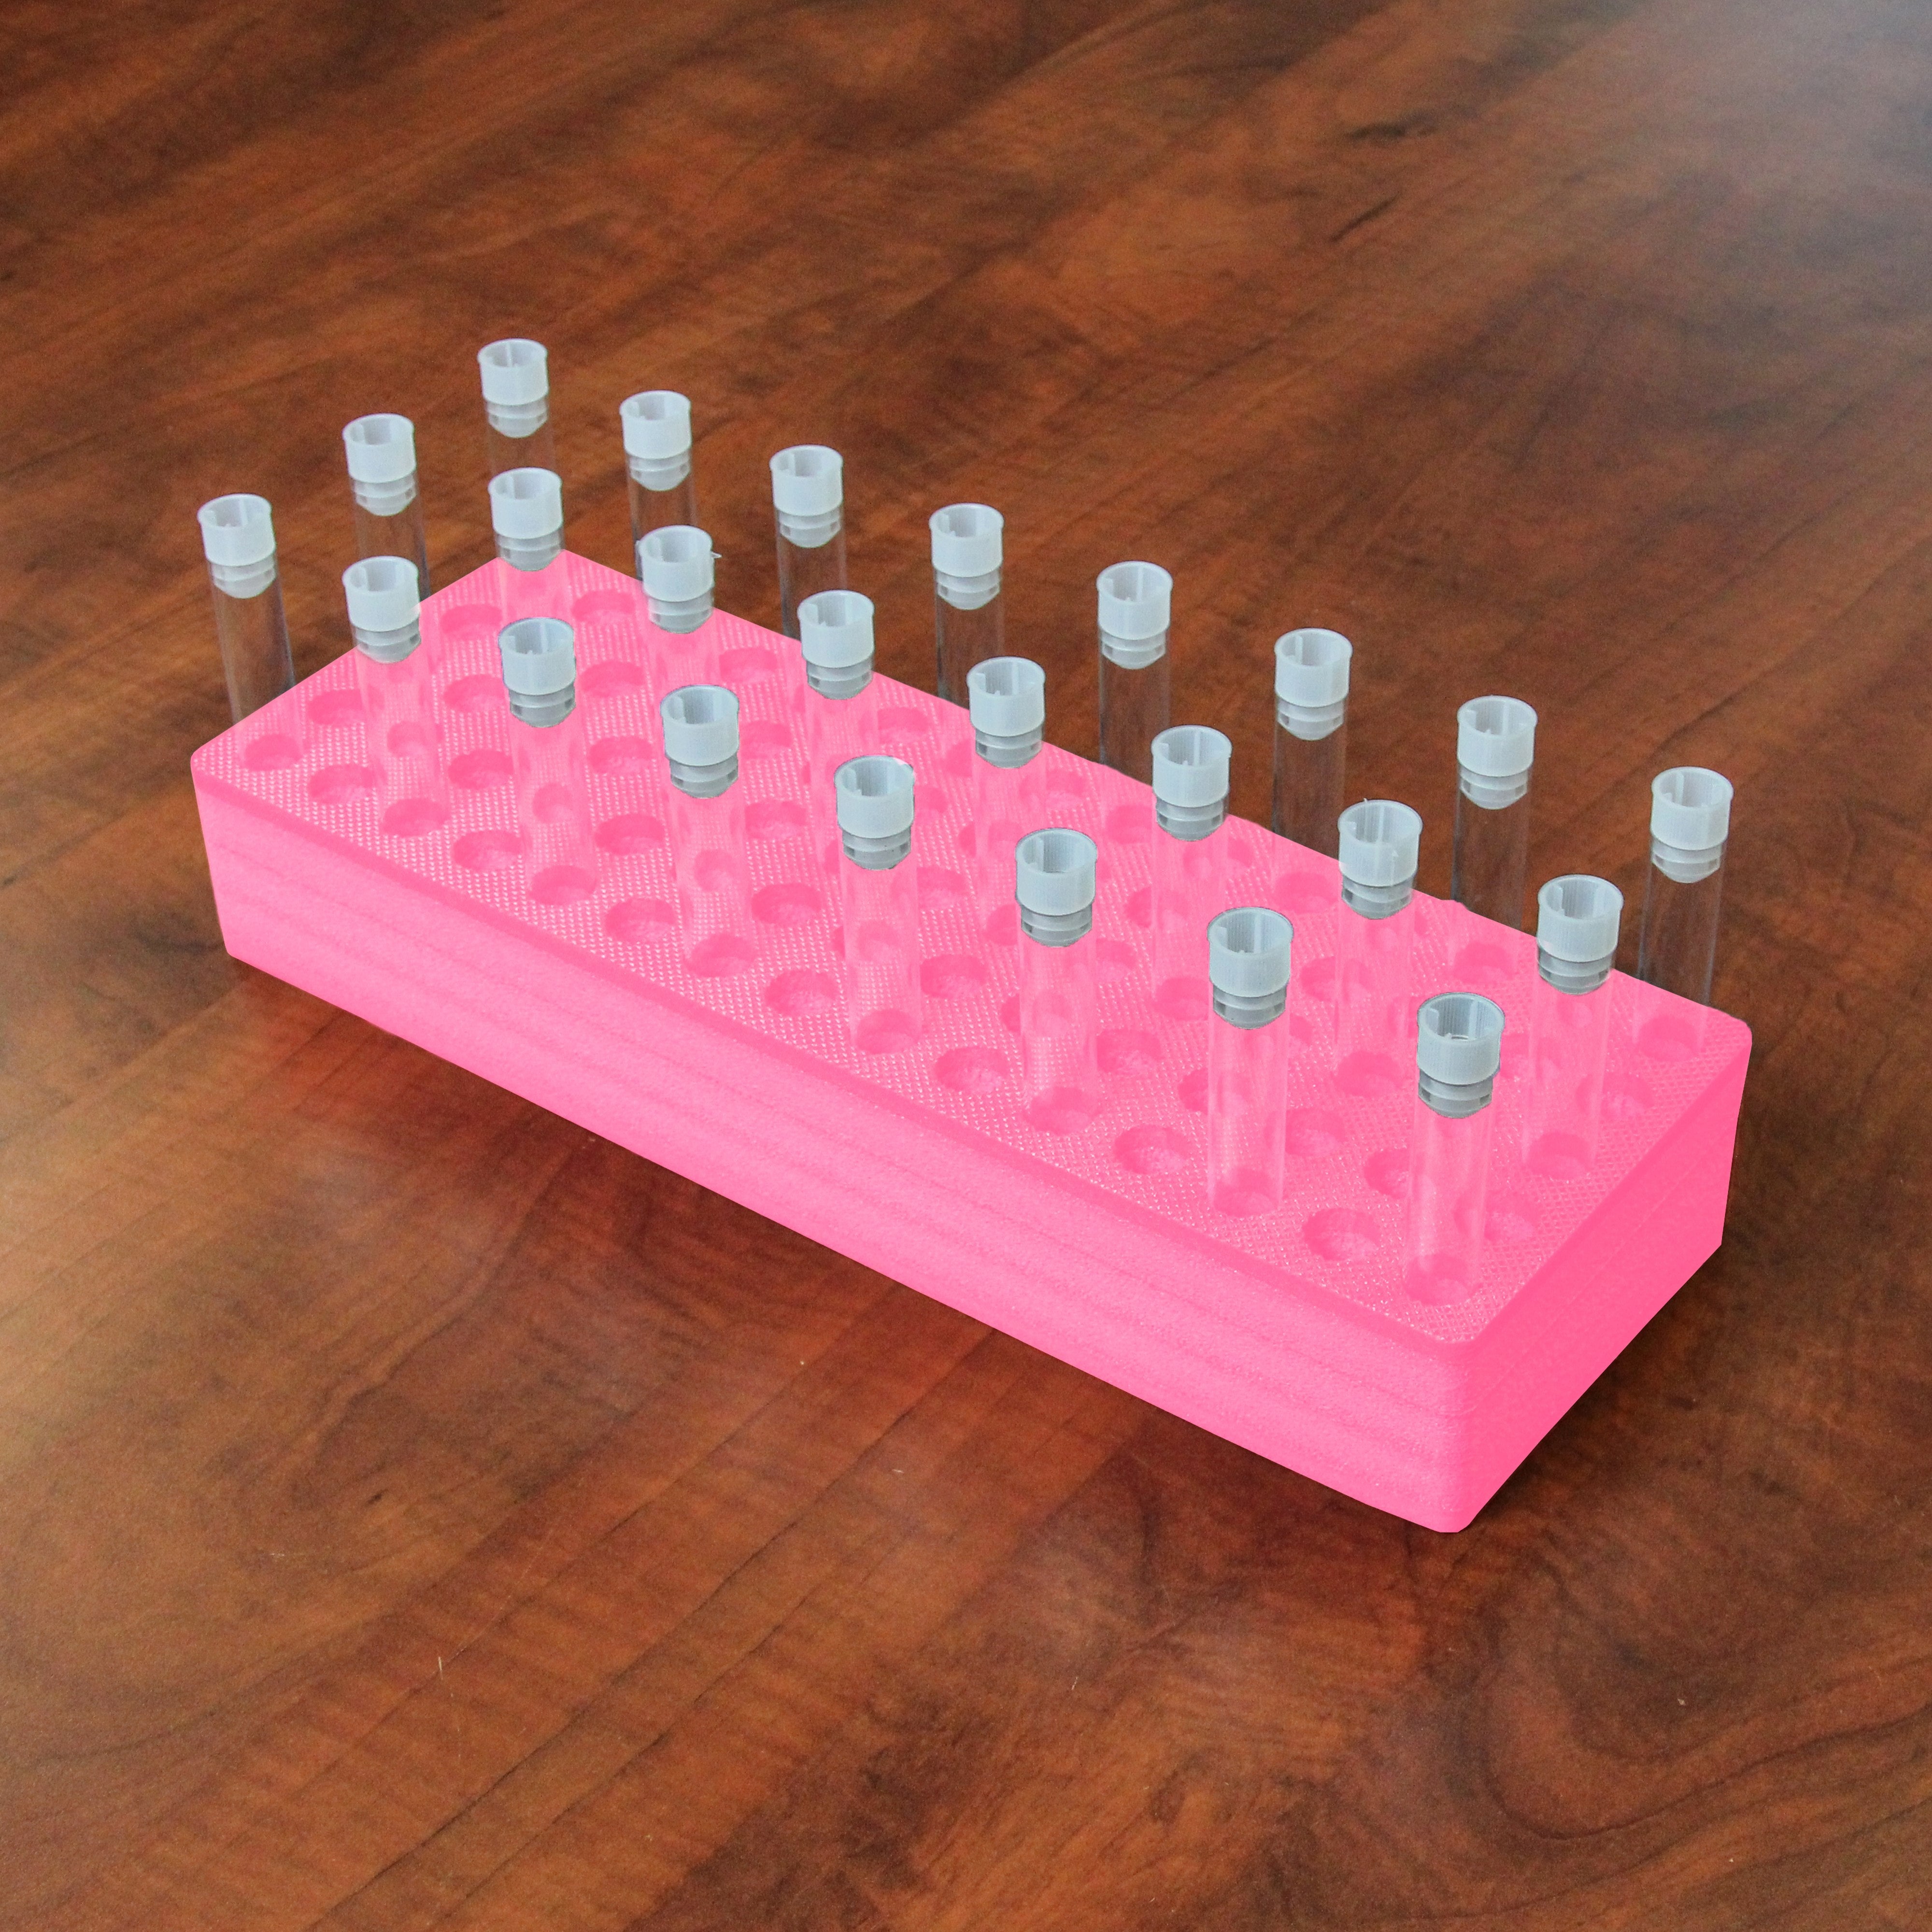 Polar Whale Test Tube Organizer Pink Foam Storage Rack Stand Transport Holds 75 Tubes Fits up to 17mm Diameter Tubes